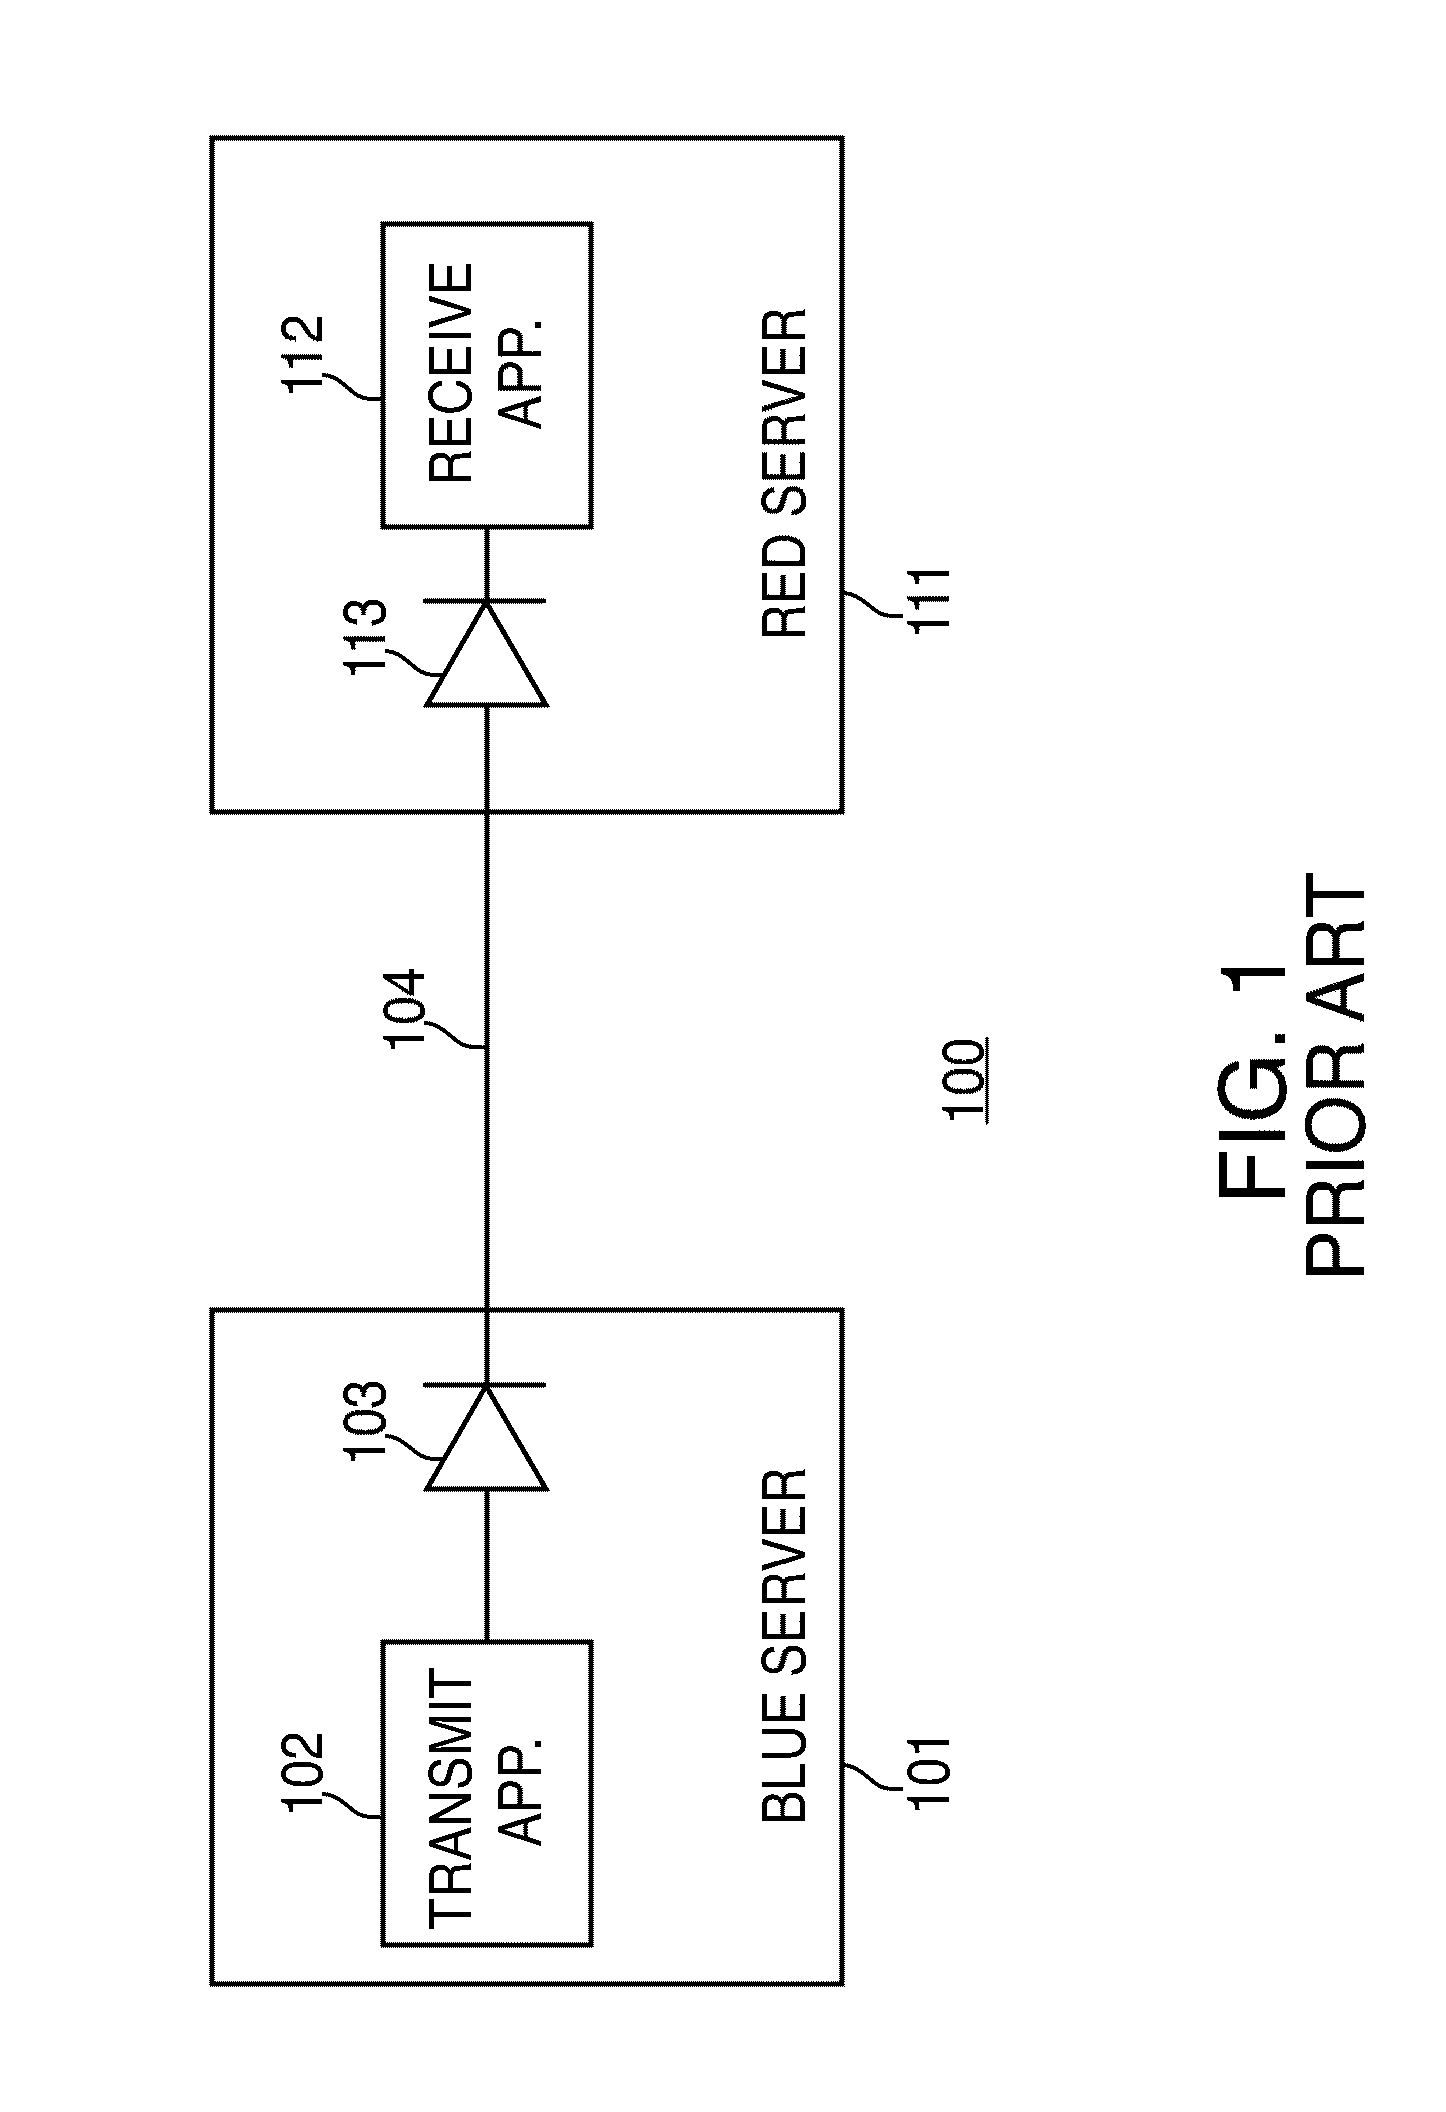 System for secure transfer of information from an industrial control system network